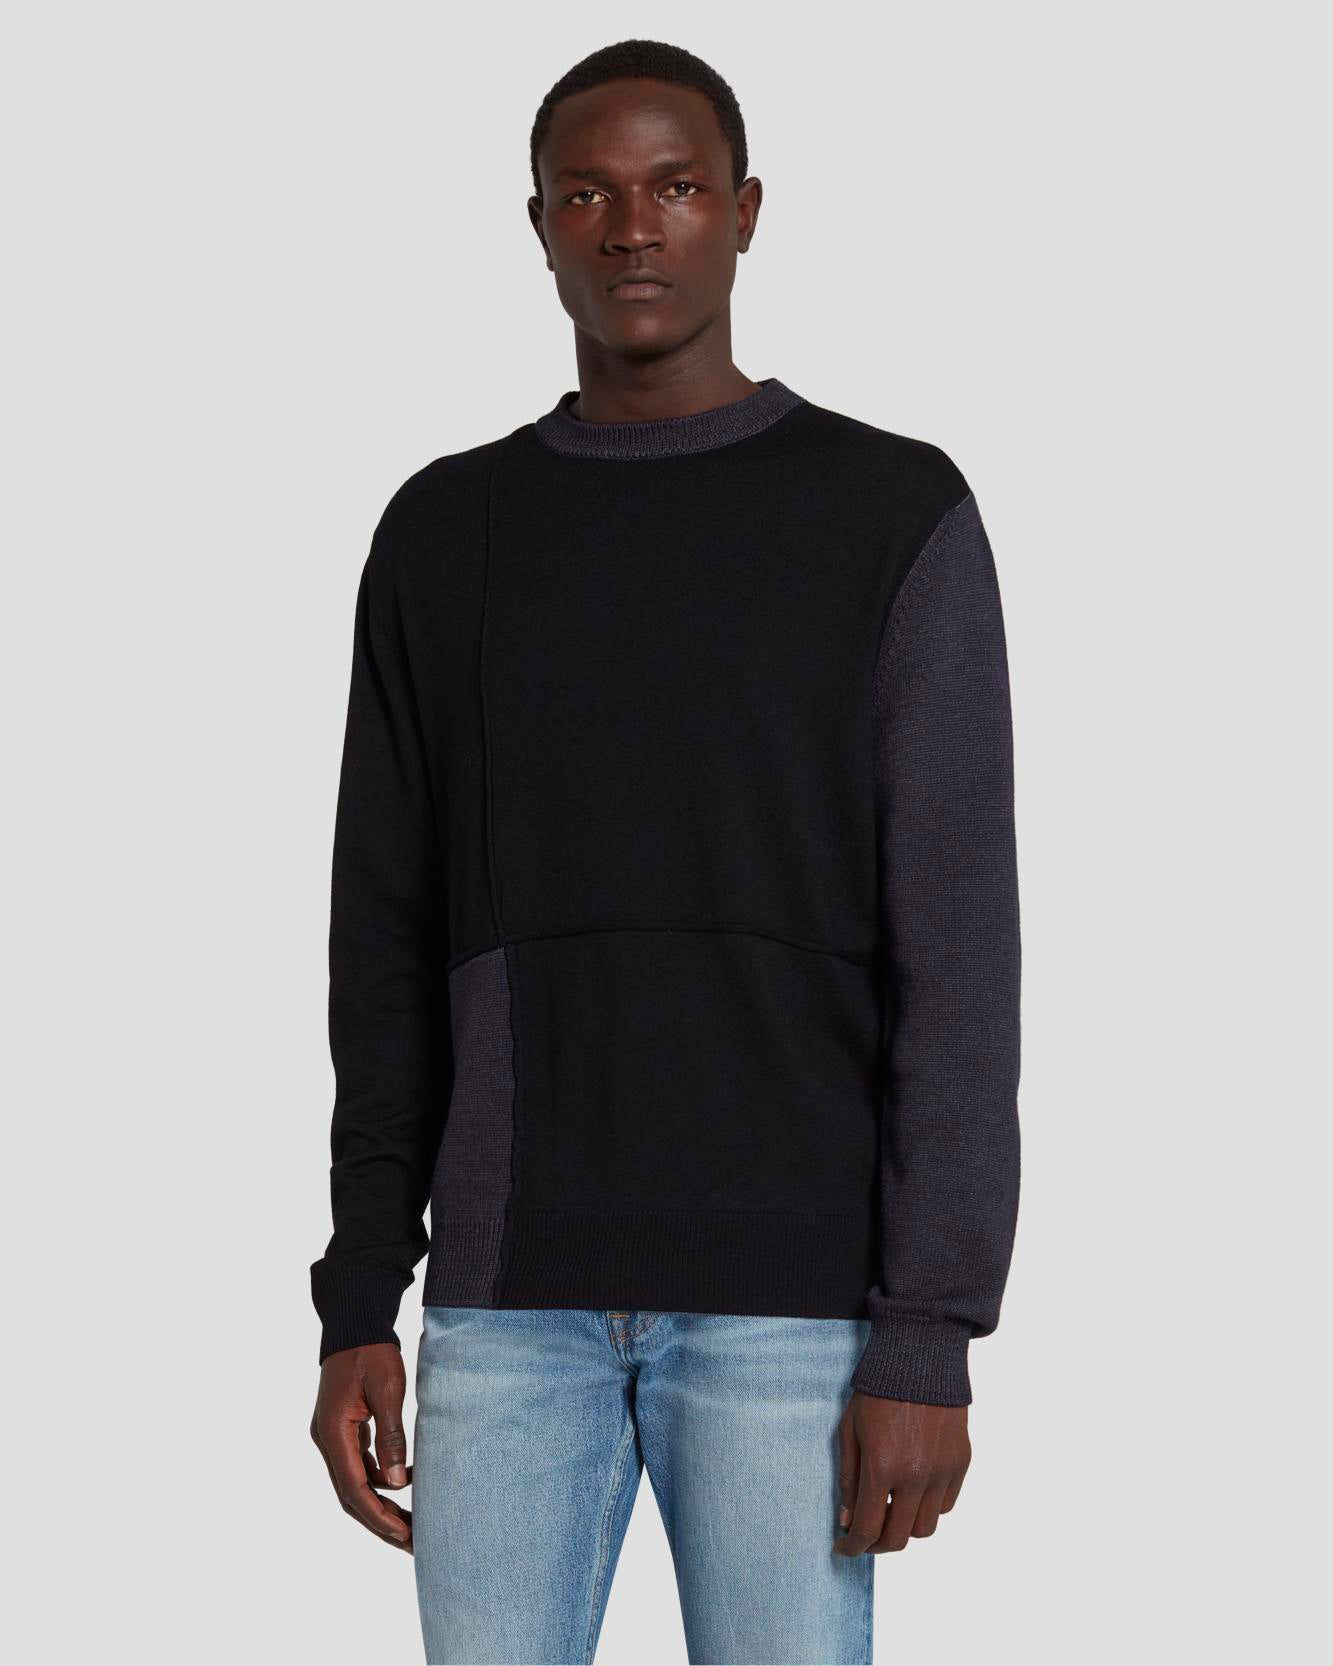 Merino Patchwork Sweater in Navy | 7 For All Mankind